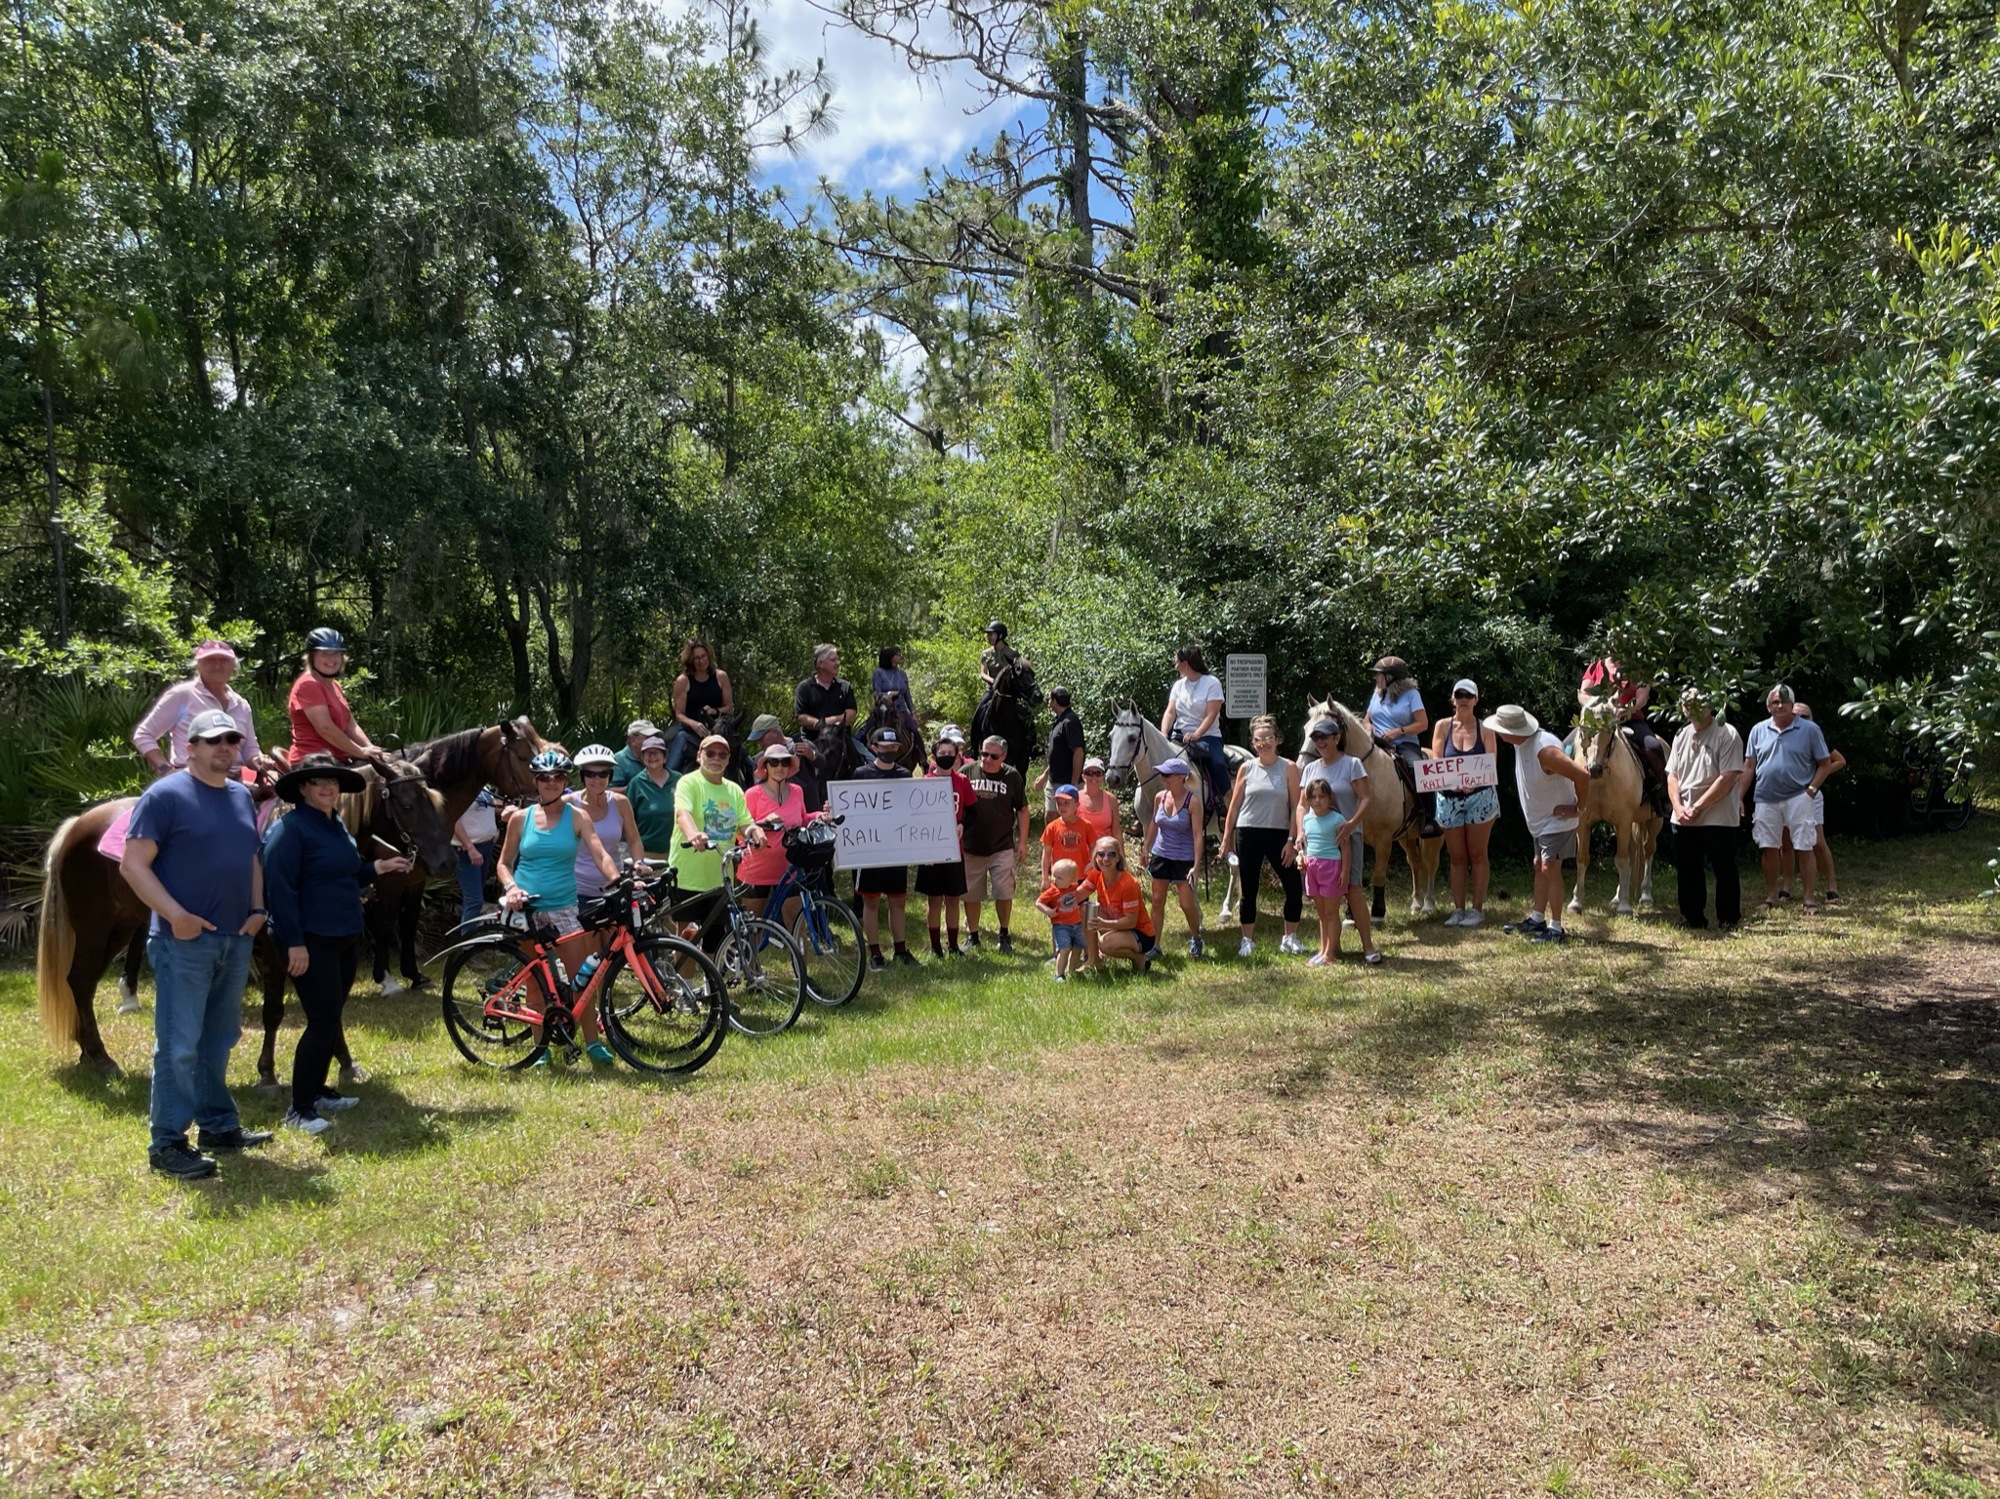 Residents of The Concession and nearby communities such as Panther Ridge show their opposition to an amendment that would allow 15 homes on 17 acres near The Concession entrance. (Courtesy of Olga Zarlenga)